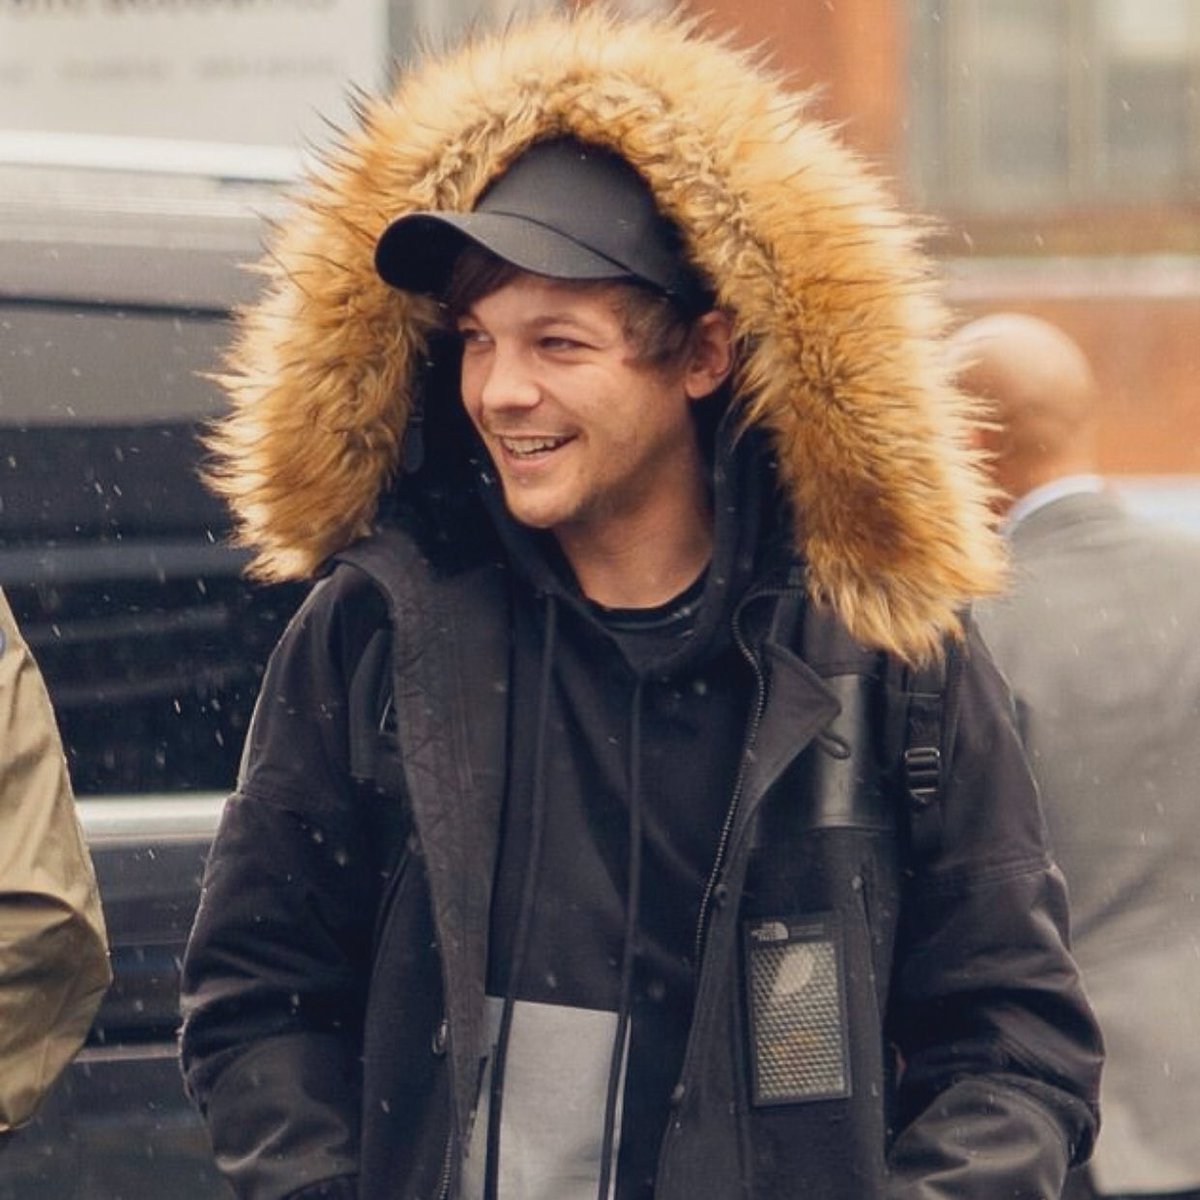  end of thread  in conclusion, basically everything louis does is adorable and endearing <3